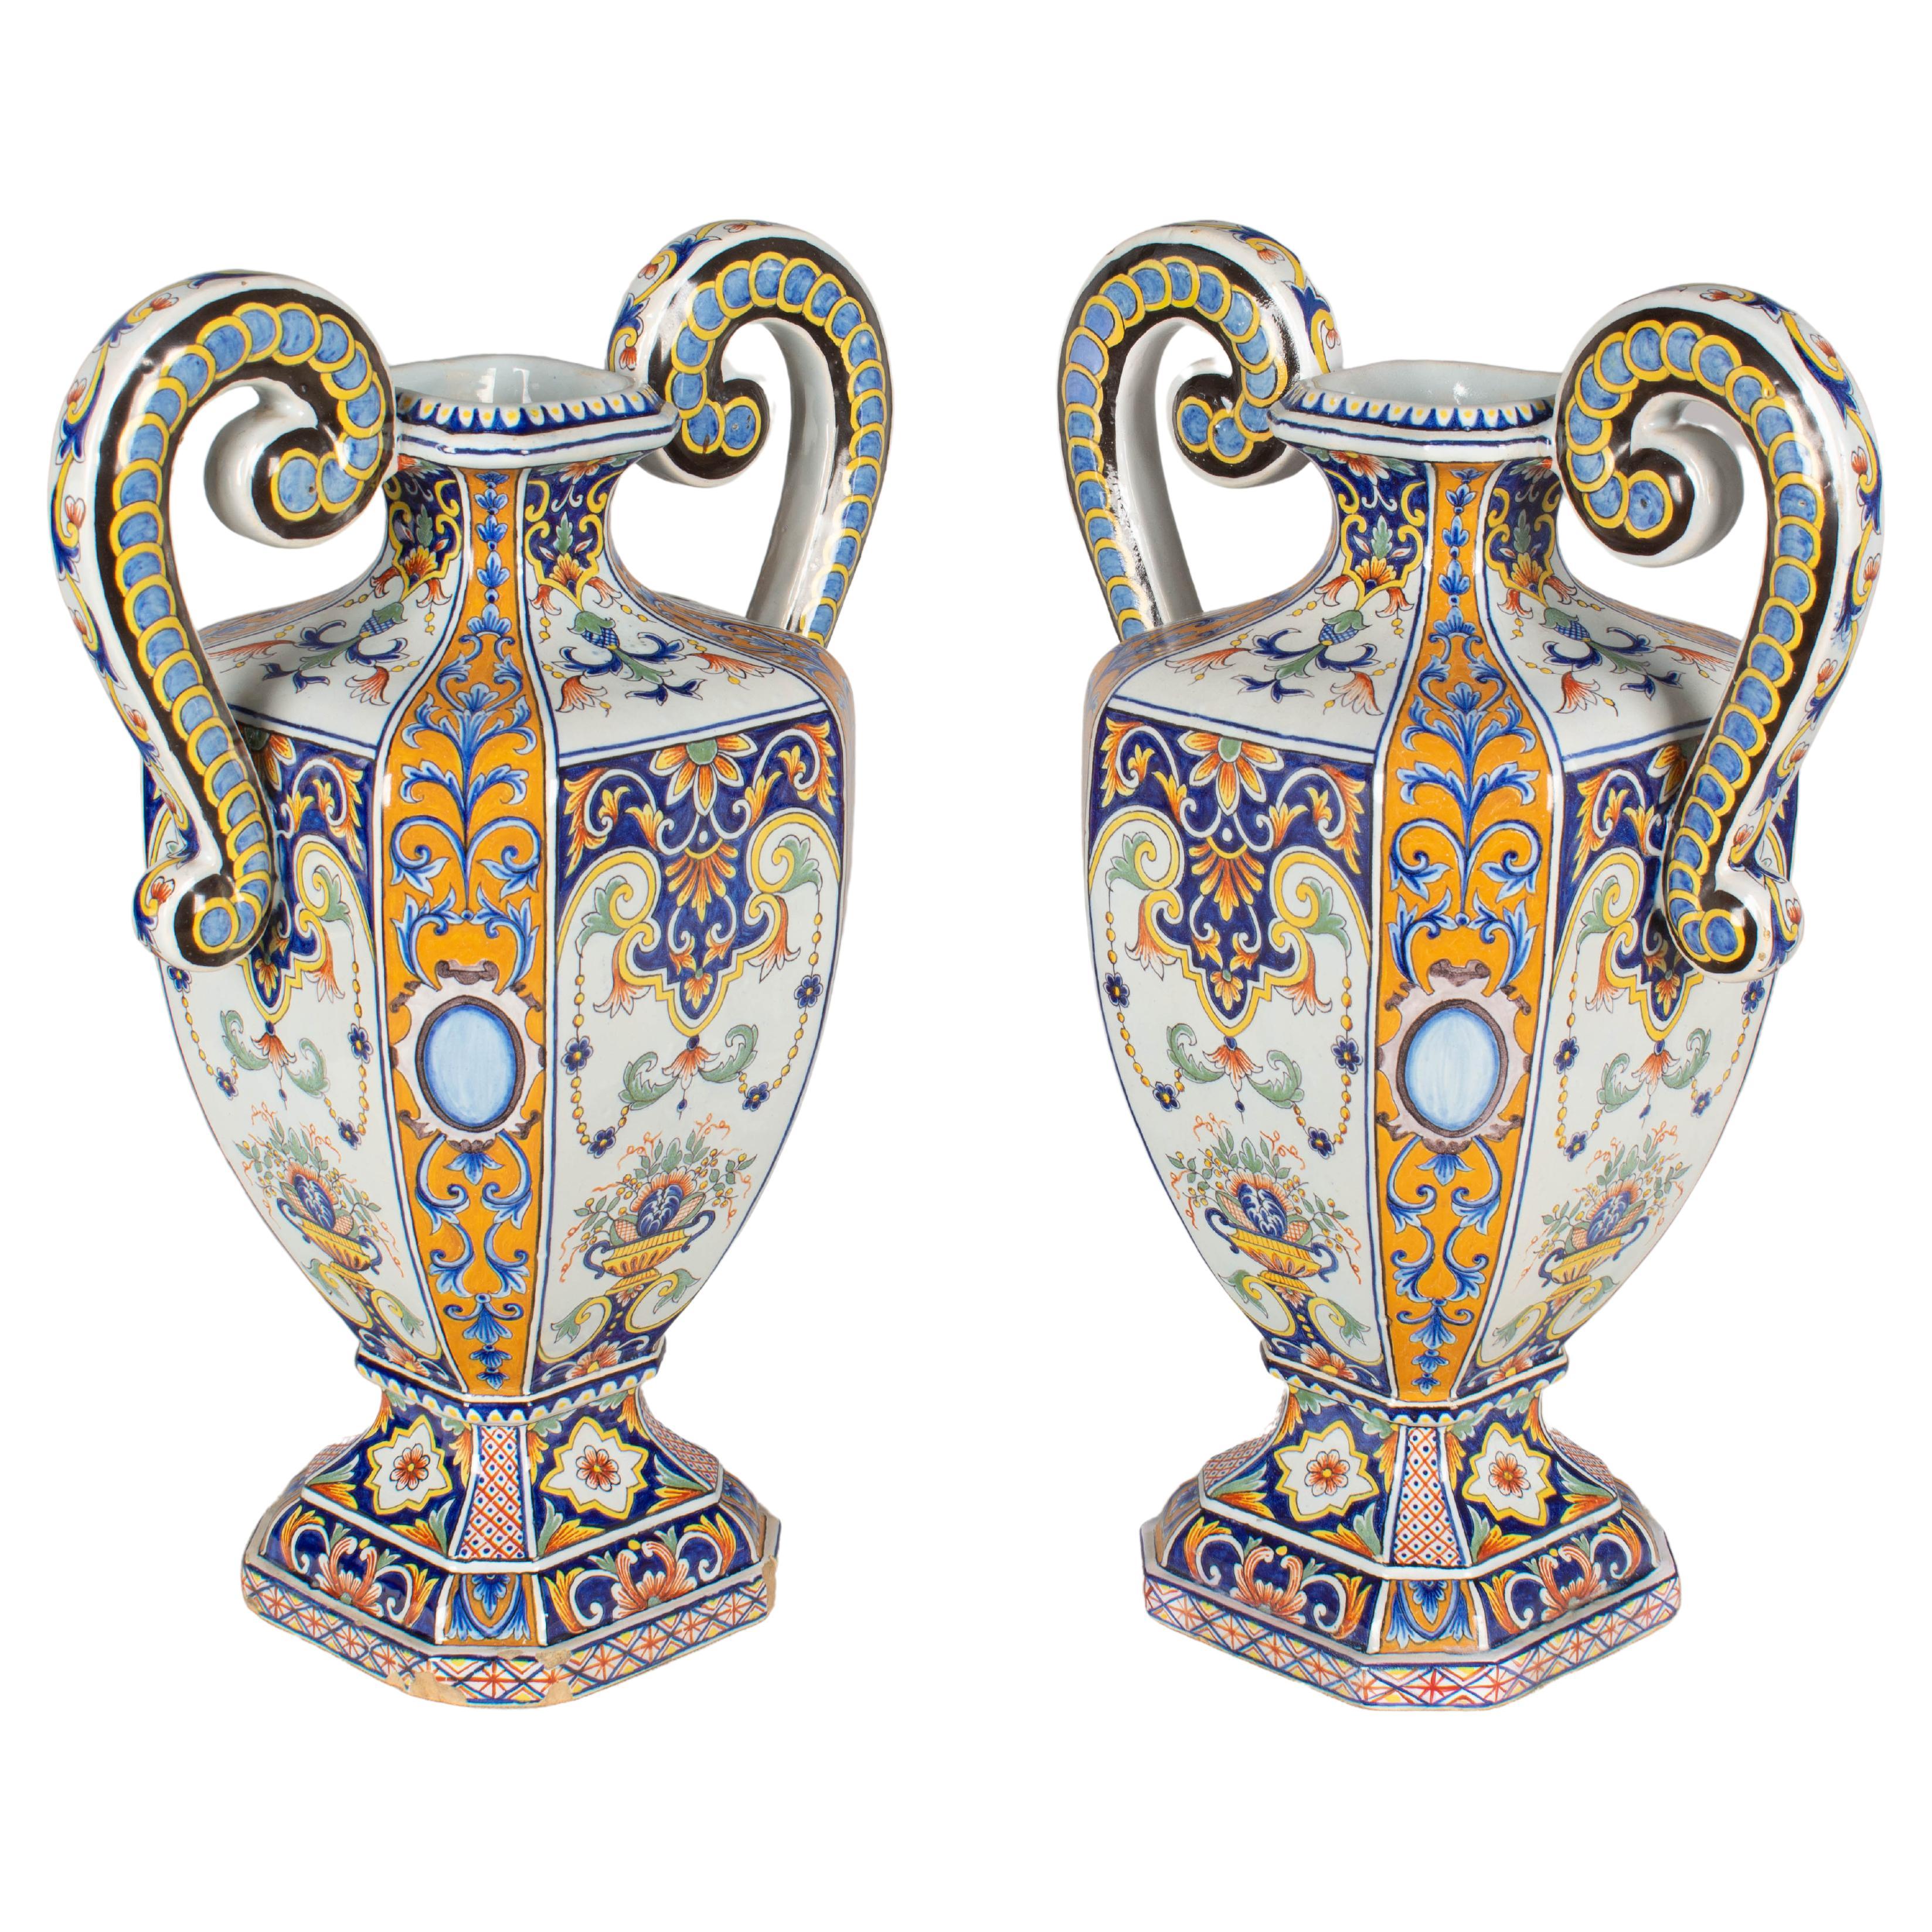 A pair of 19th century French Desvres faience urn form vases with large double handles. Beautiful hand-painted floral decoration in the traditional colors of blue, orange, yellow and green. Fourmaintraux-Courquin mark on underside: F.-C. Circa